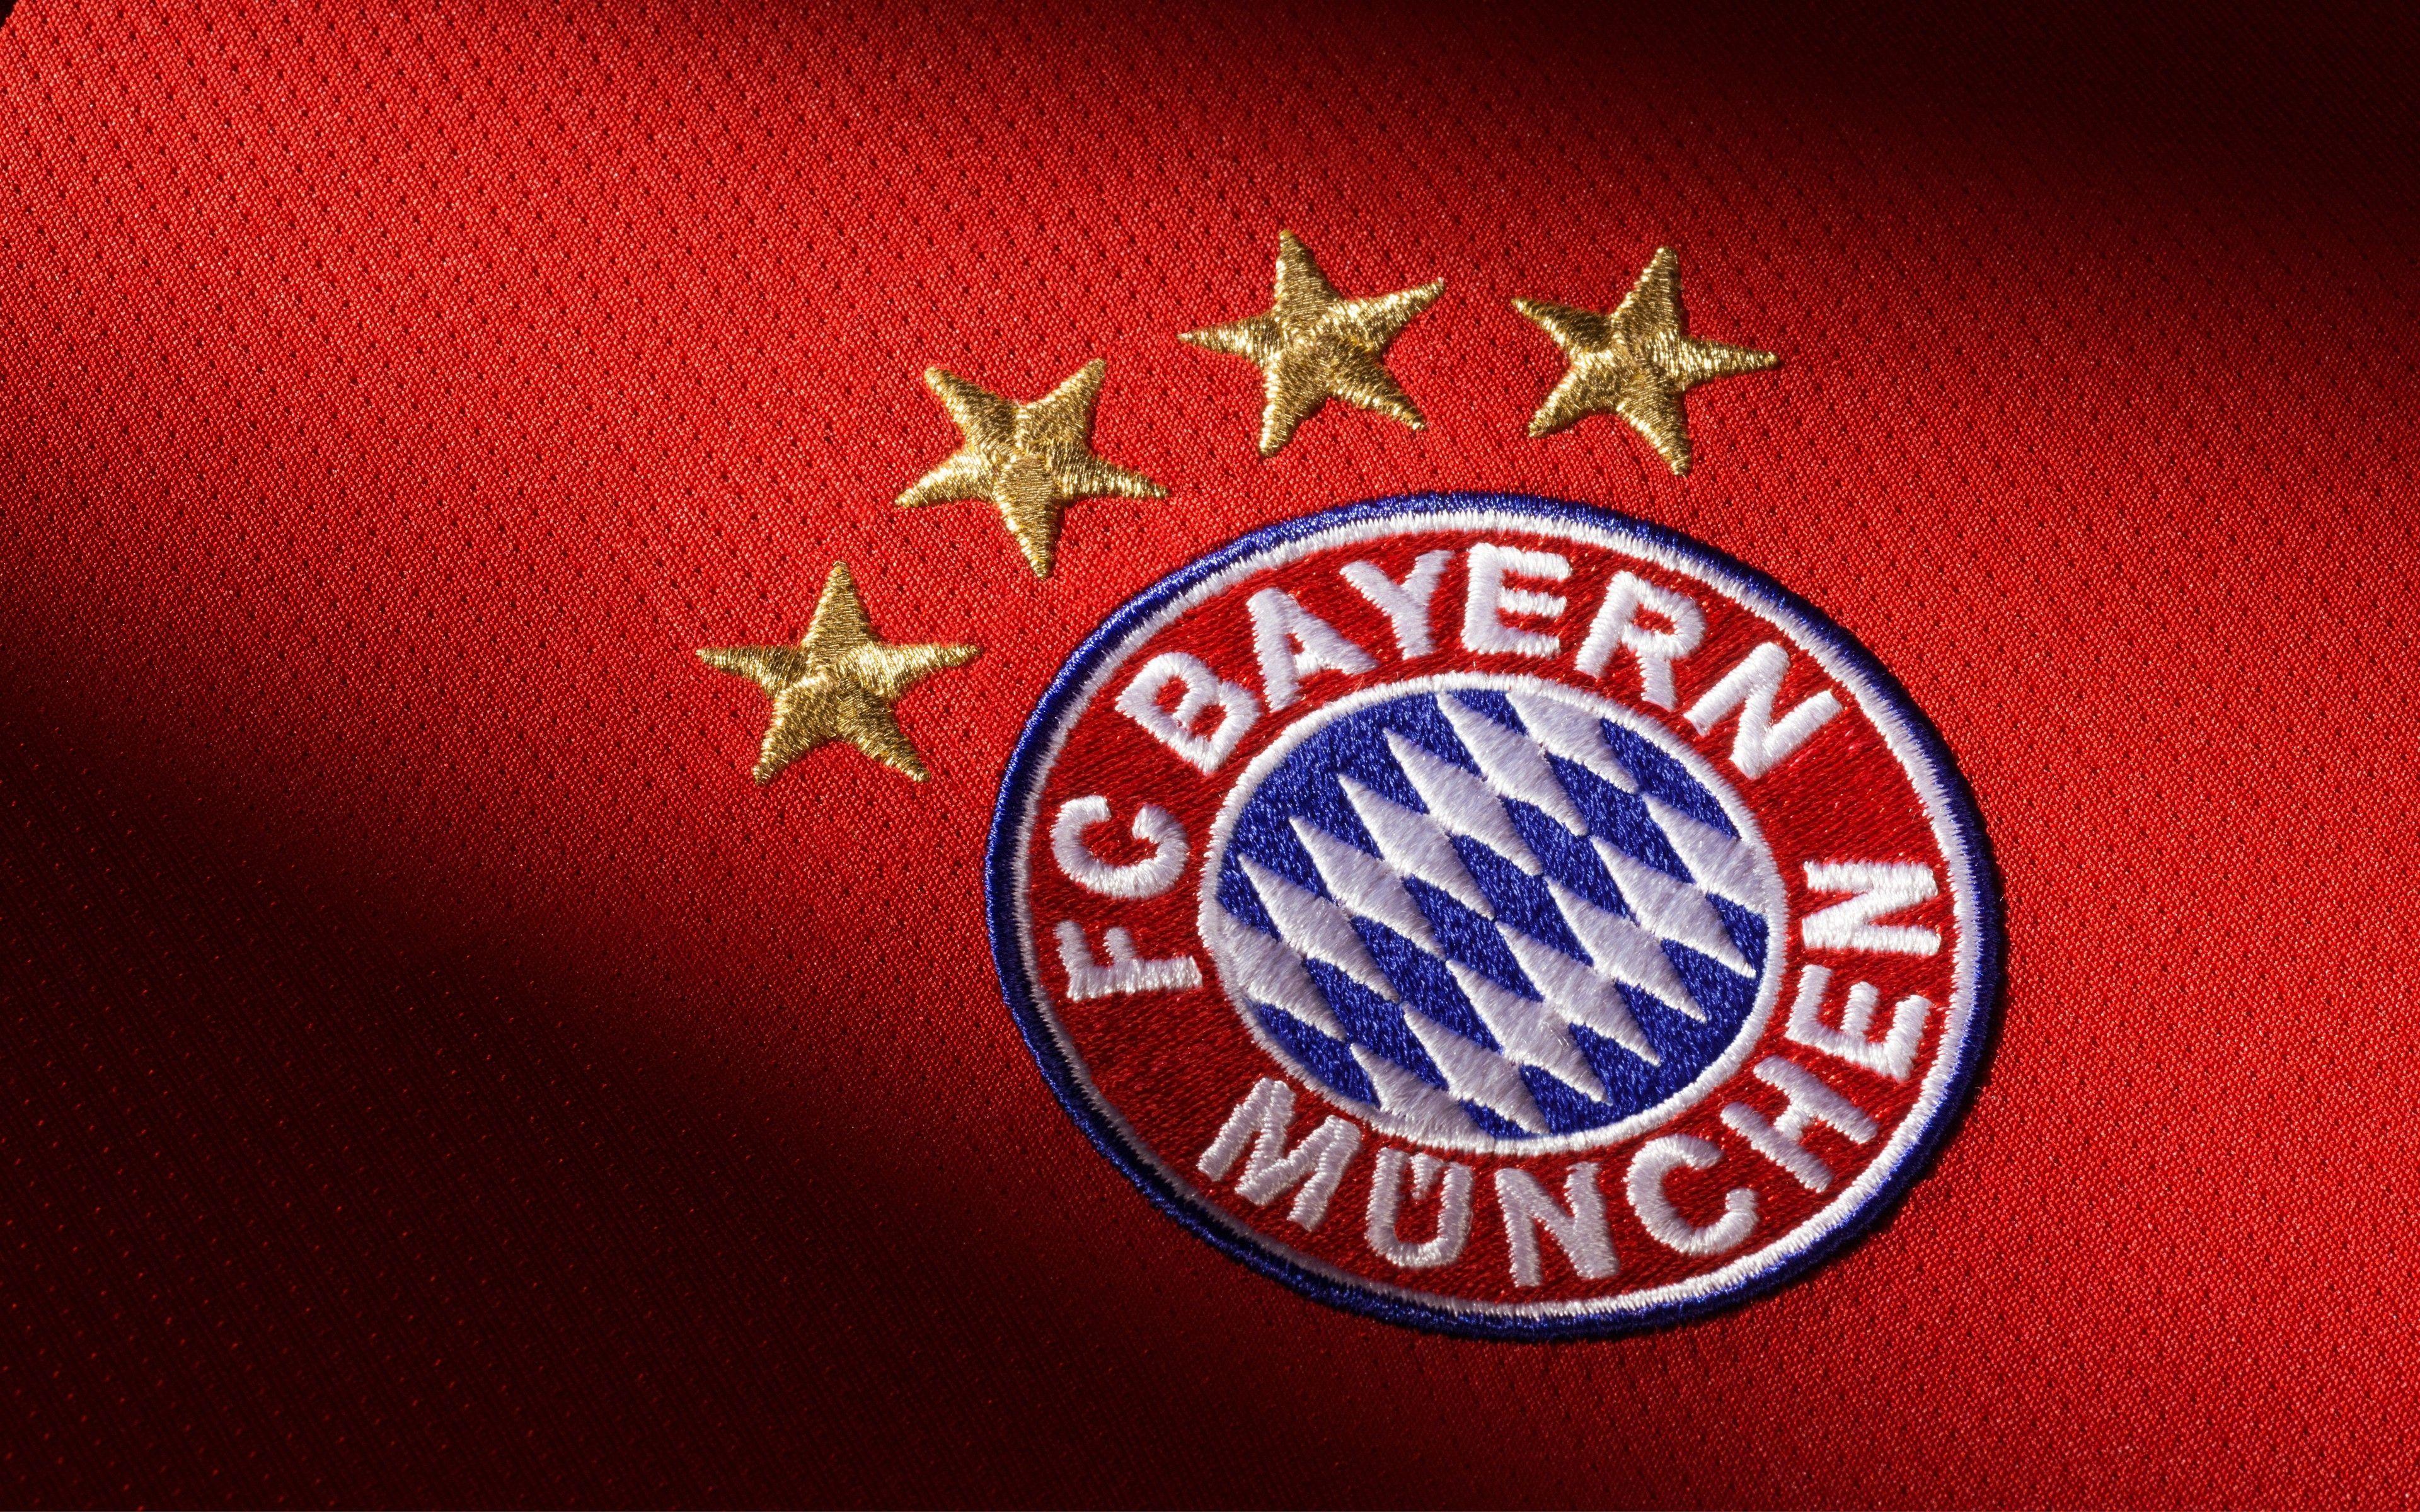 FC Bayern München Wallpapers - Wallpaper Cave